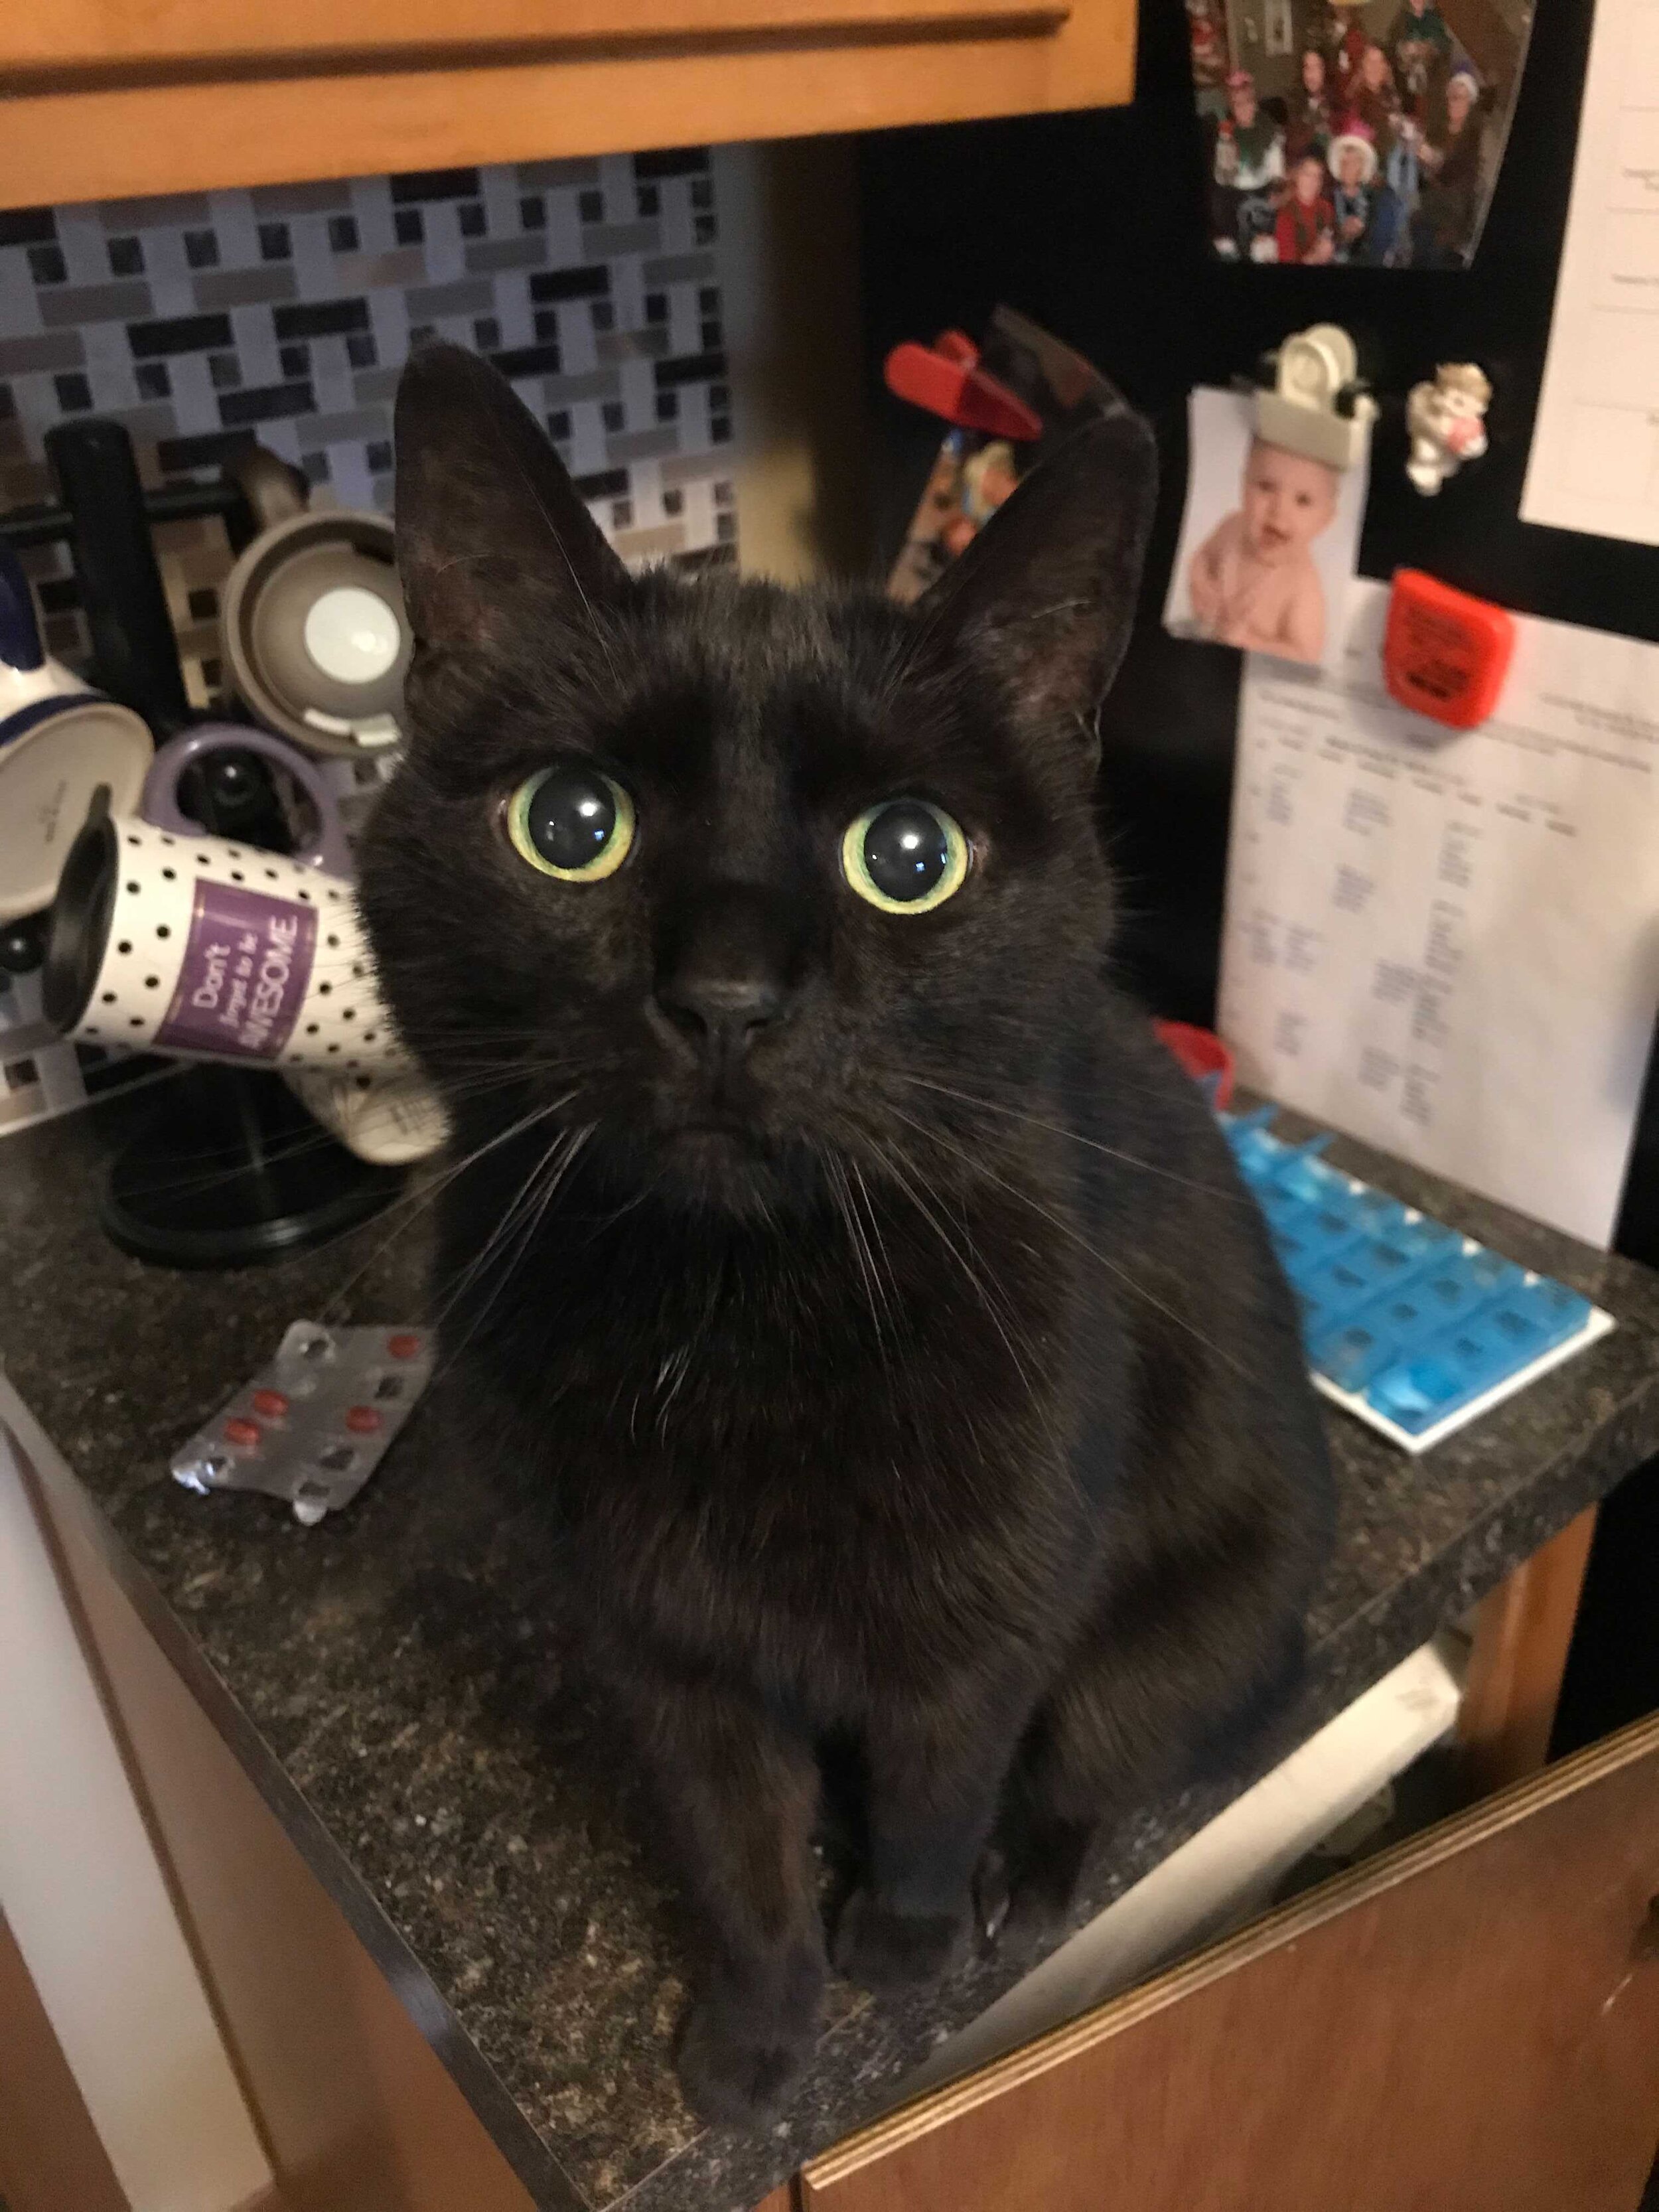  A black cat sitting on a counter staring at the camera 